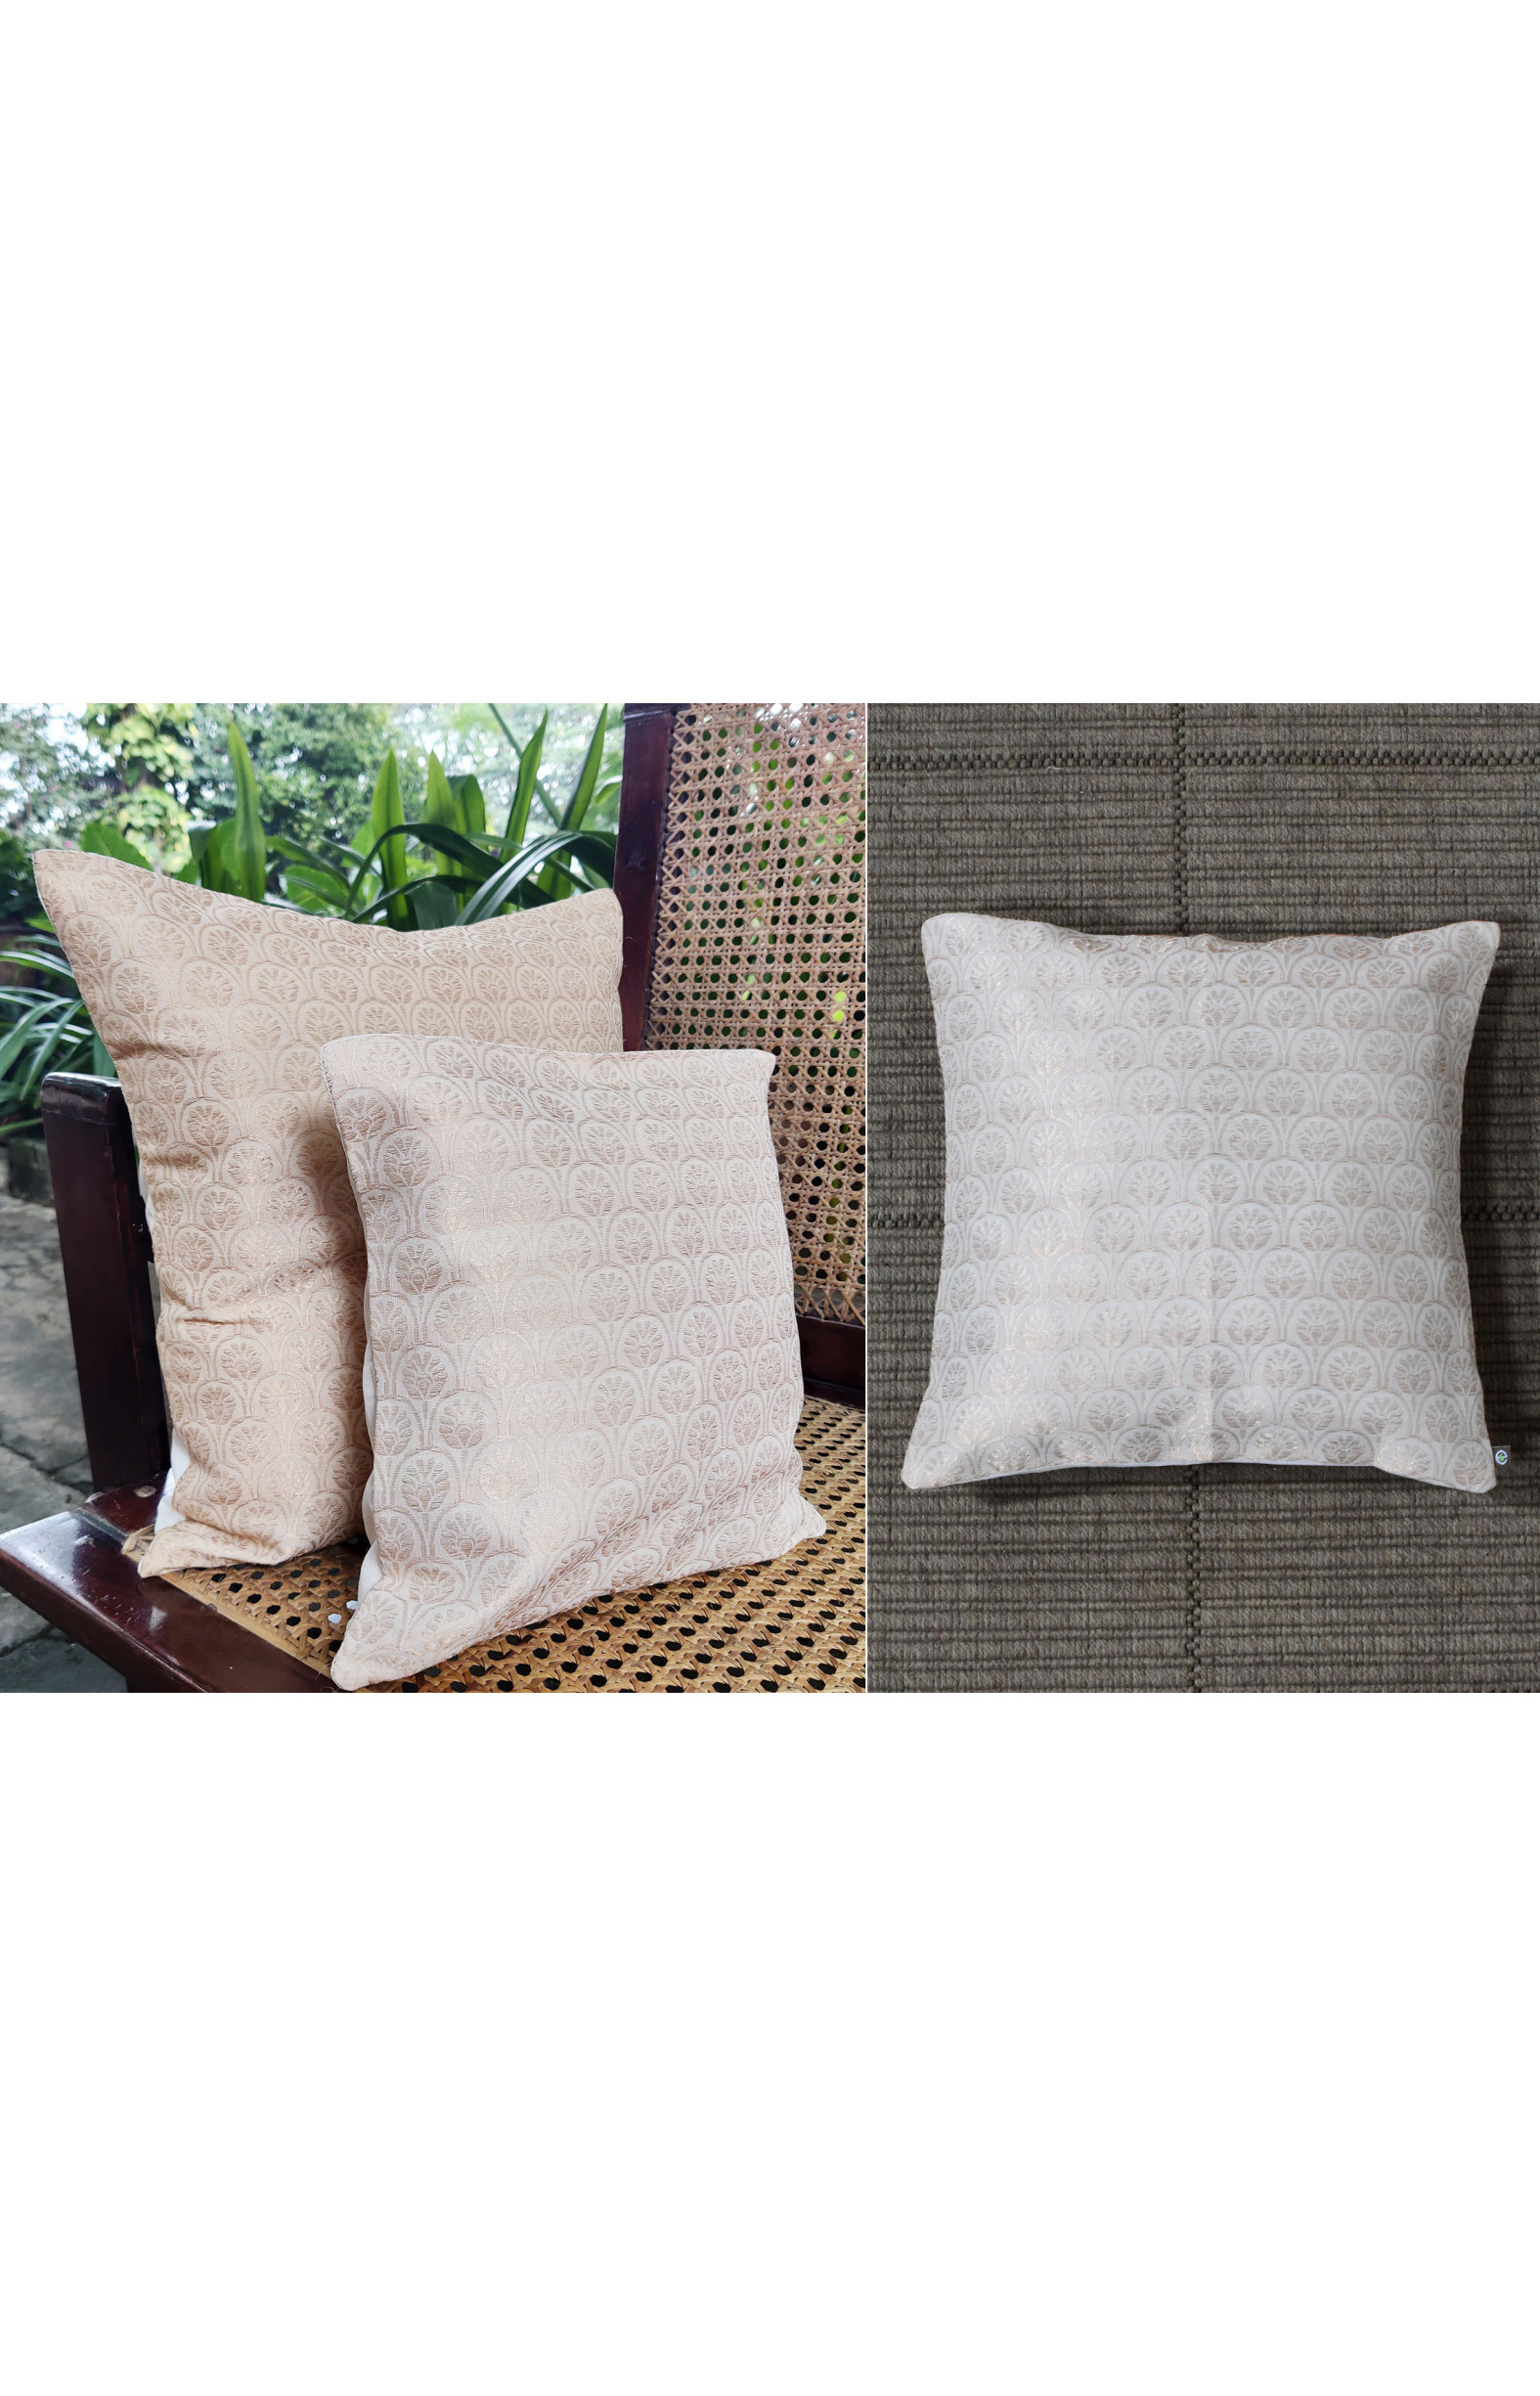 Handloom Organic Cotton Cushion Cover Off-White with Gold 